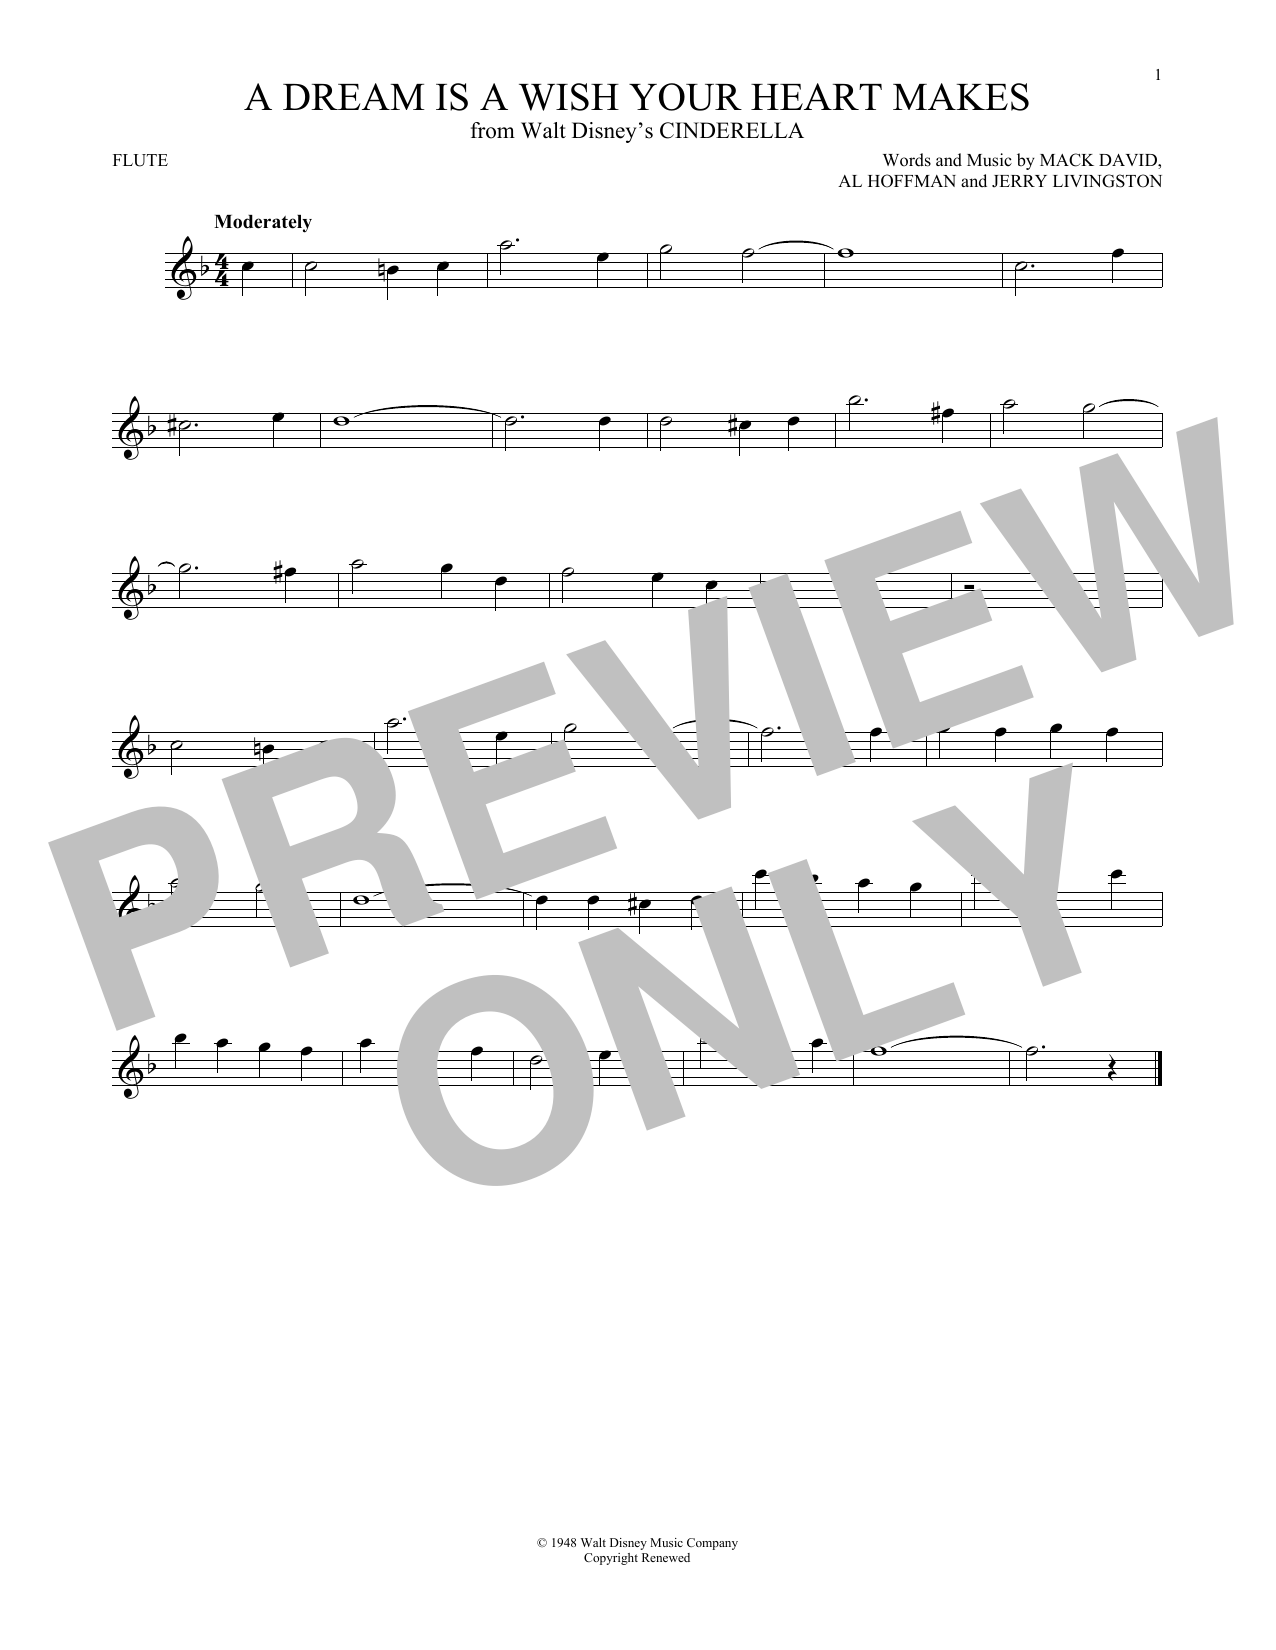 Download Mack David, Al Hoffman and Jerry Liv A Dream Is A Wish Your Heart Makes Sheet Music